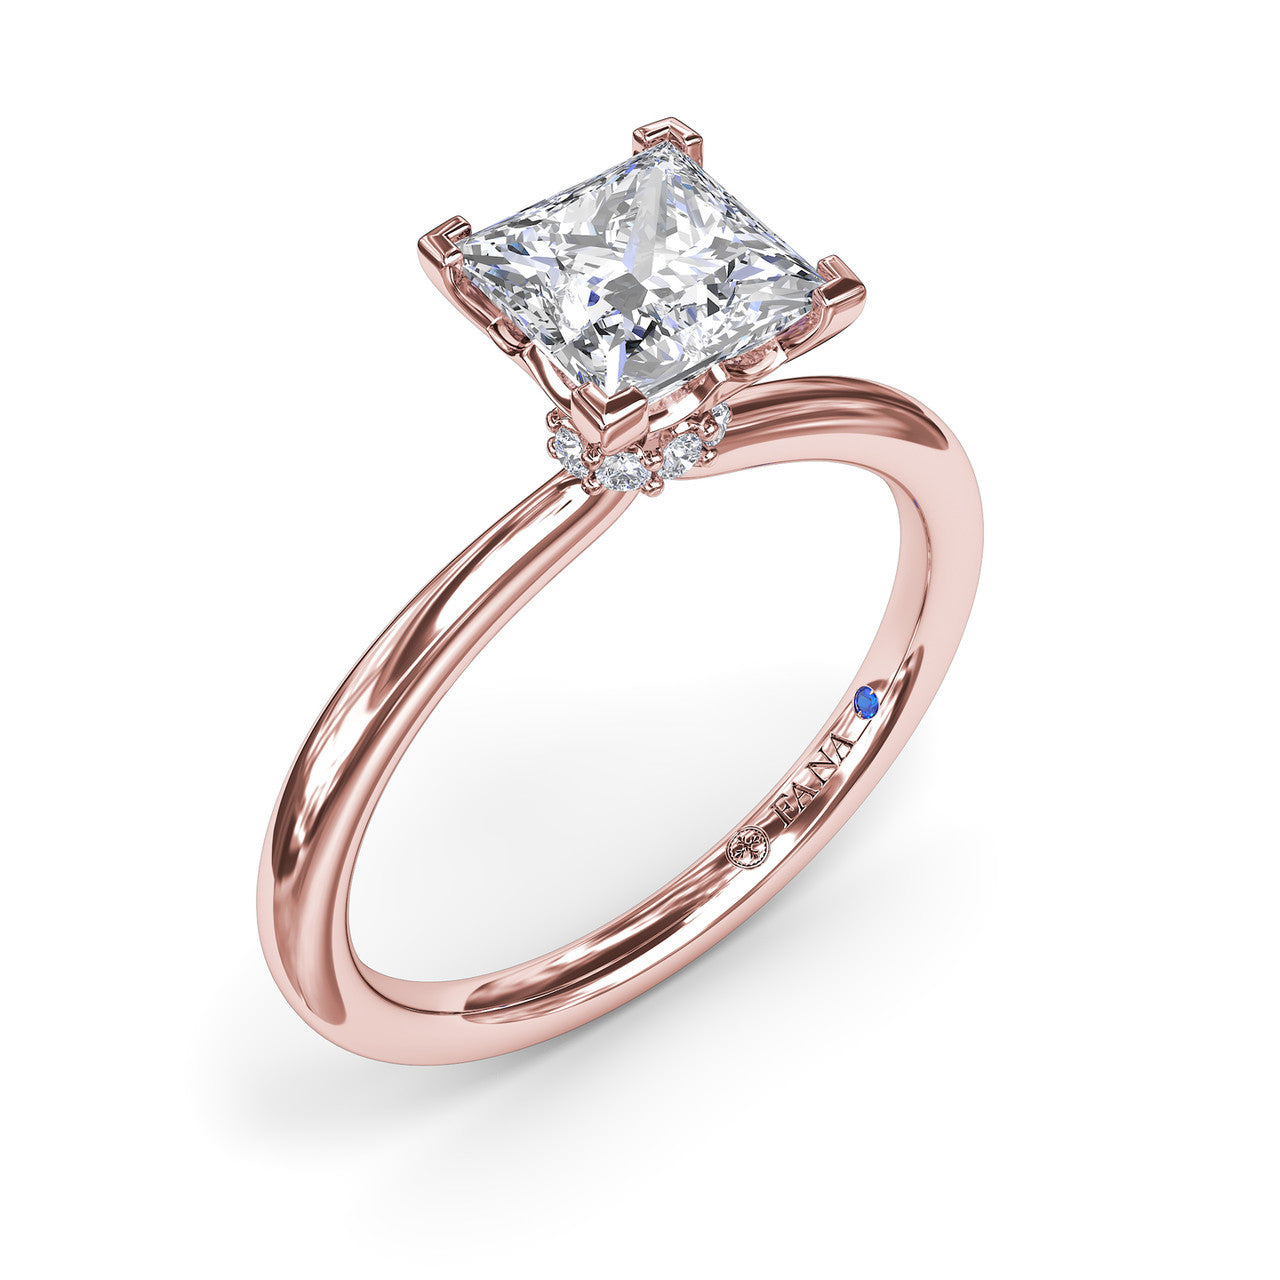 2 Tone Princess Cut Thin Solitaire diamond Engagement Ring In 14K Rose Gold  | Fascinating Diamonds